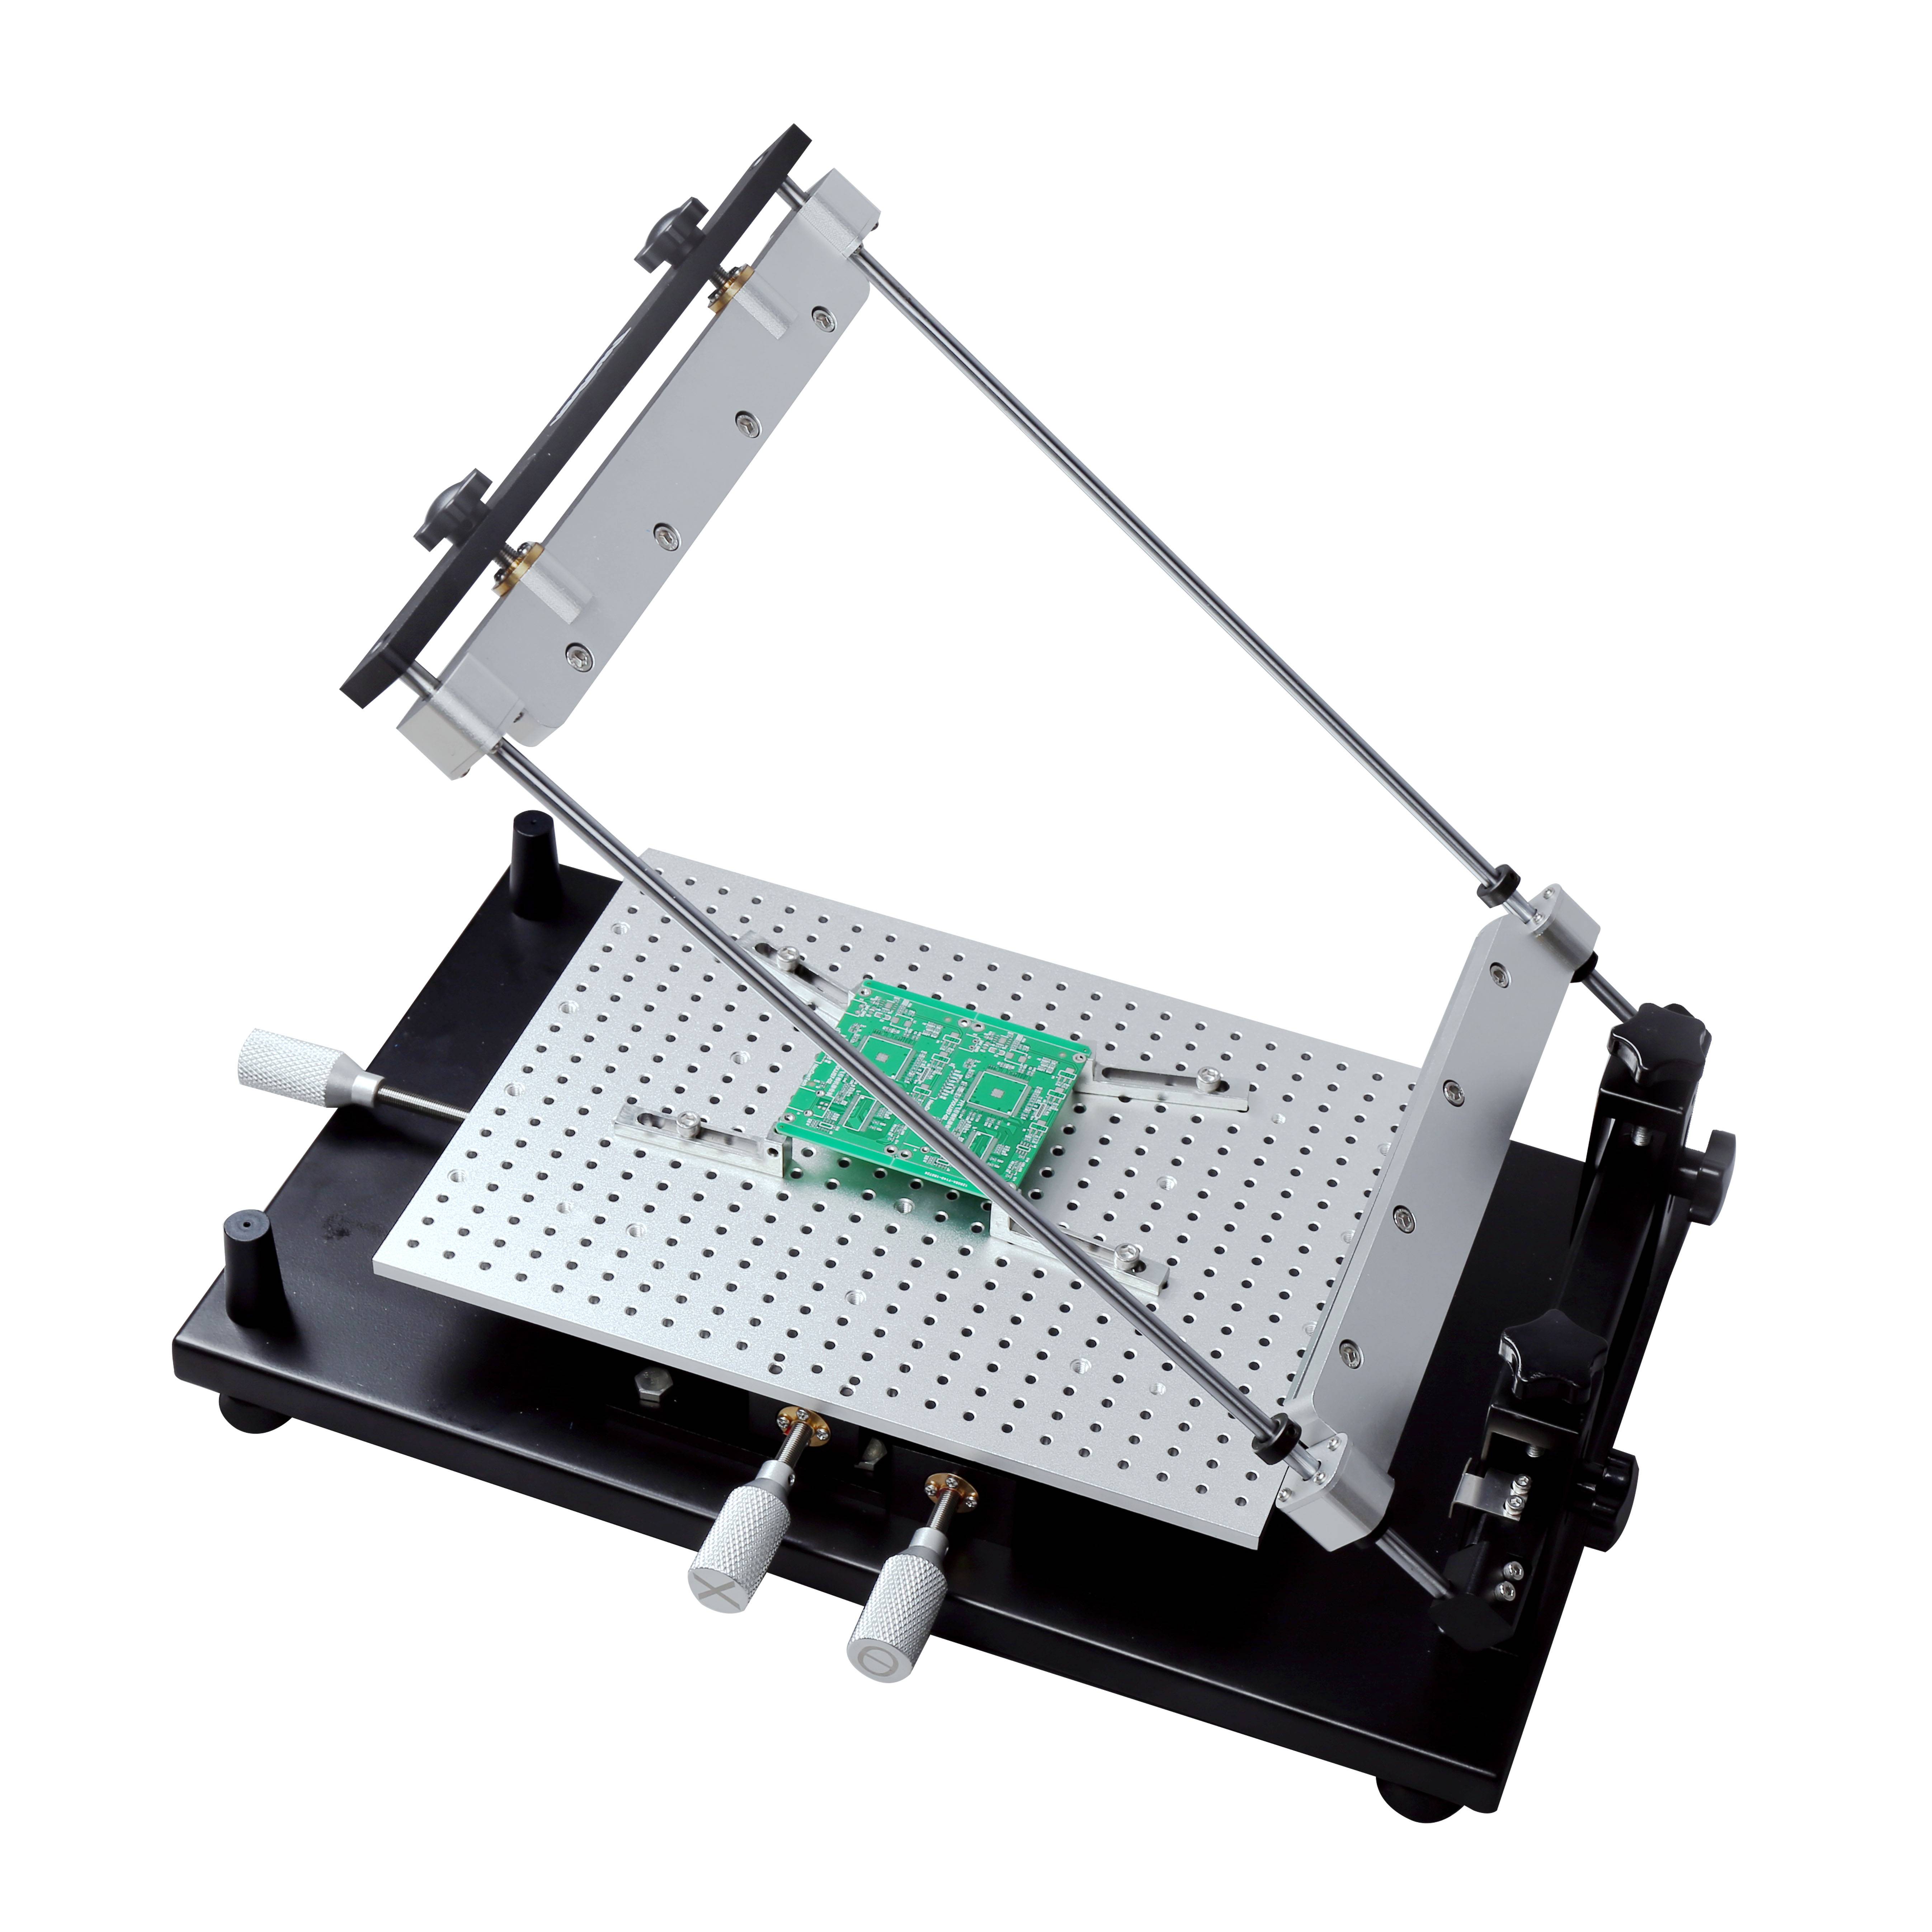 PCB Solder Paste Printing Machine Manufacturers and Suppliers China -  Wholesale Products - Neoden Technology